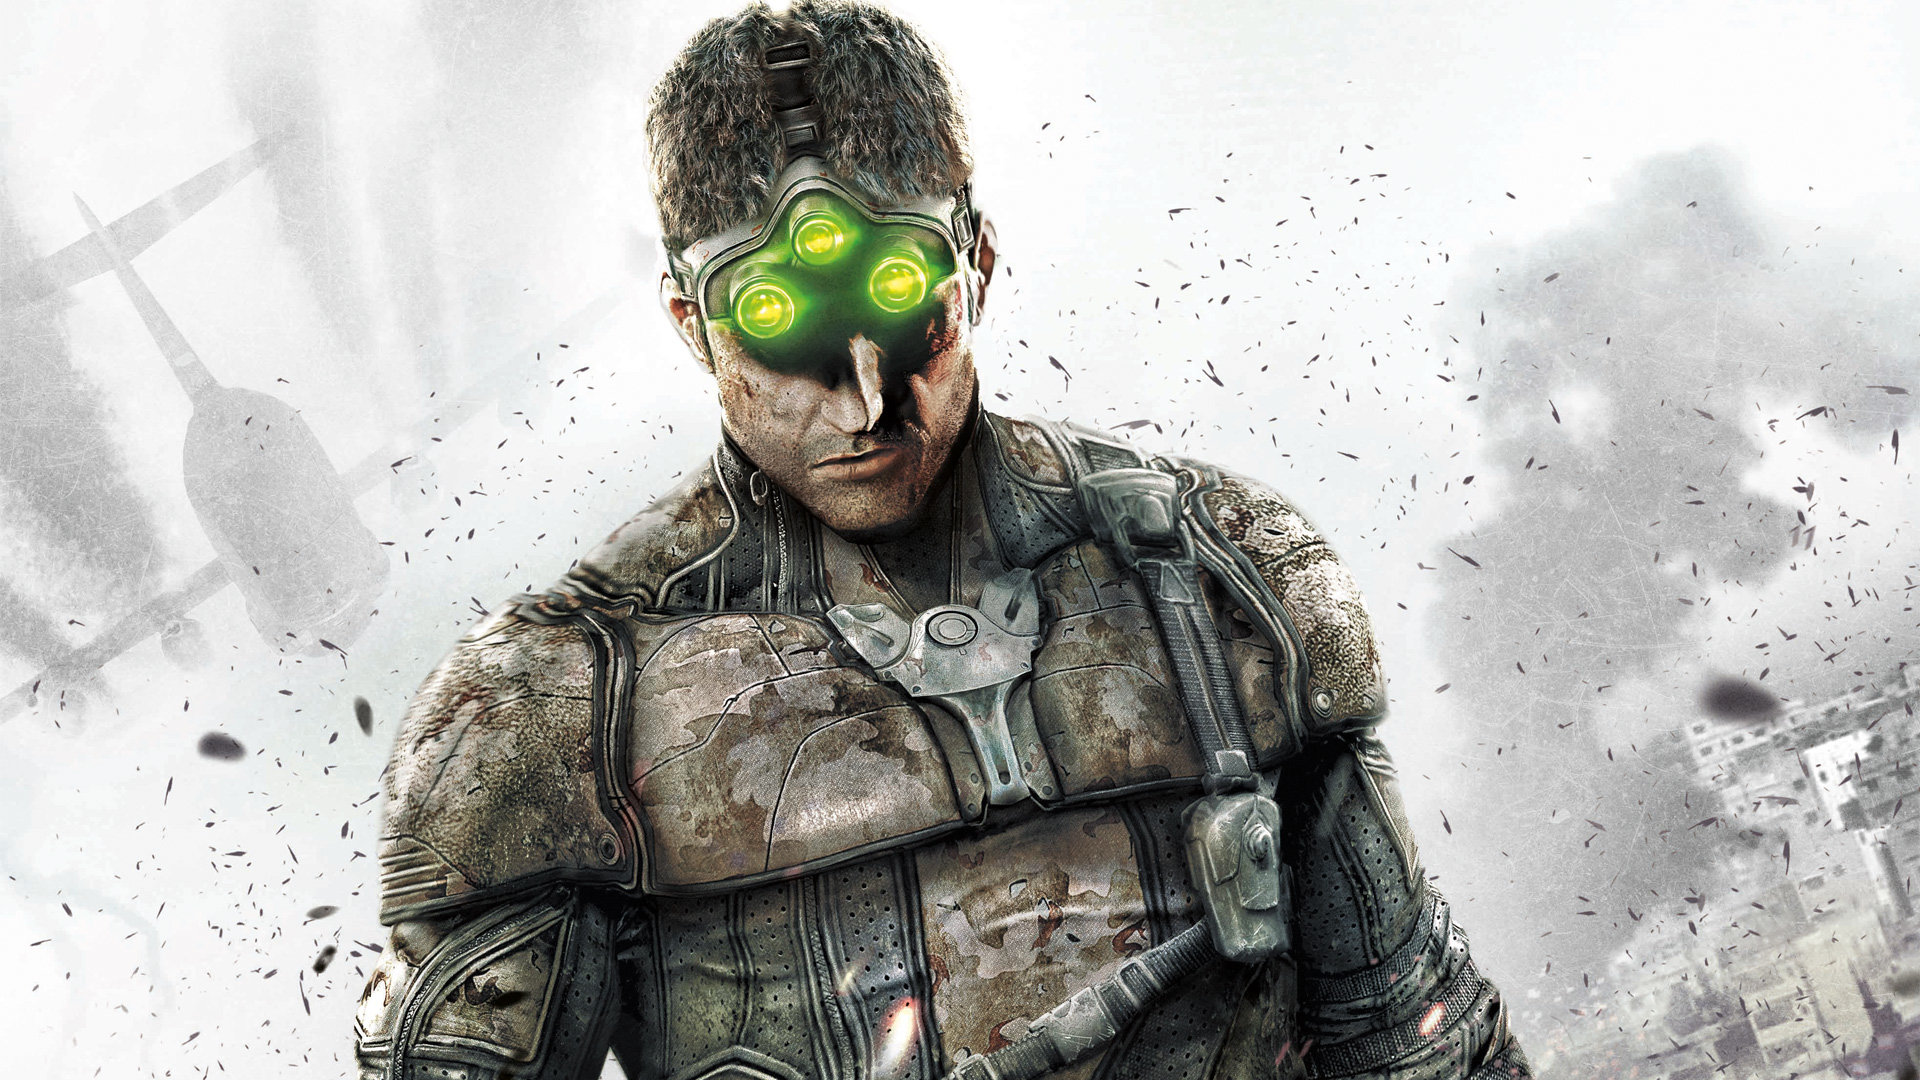 A Splinter Cell remake is in the works at Ubisoft Toronto - XboxEra